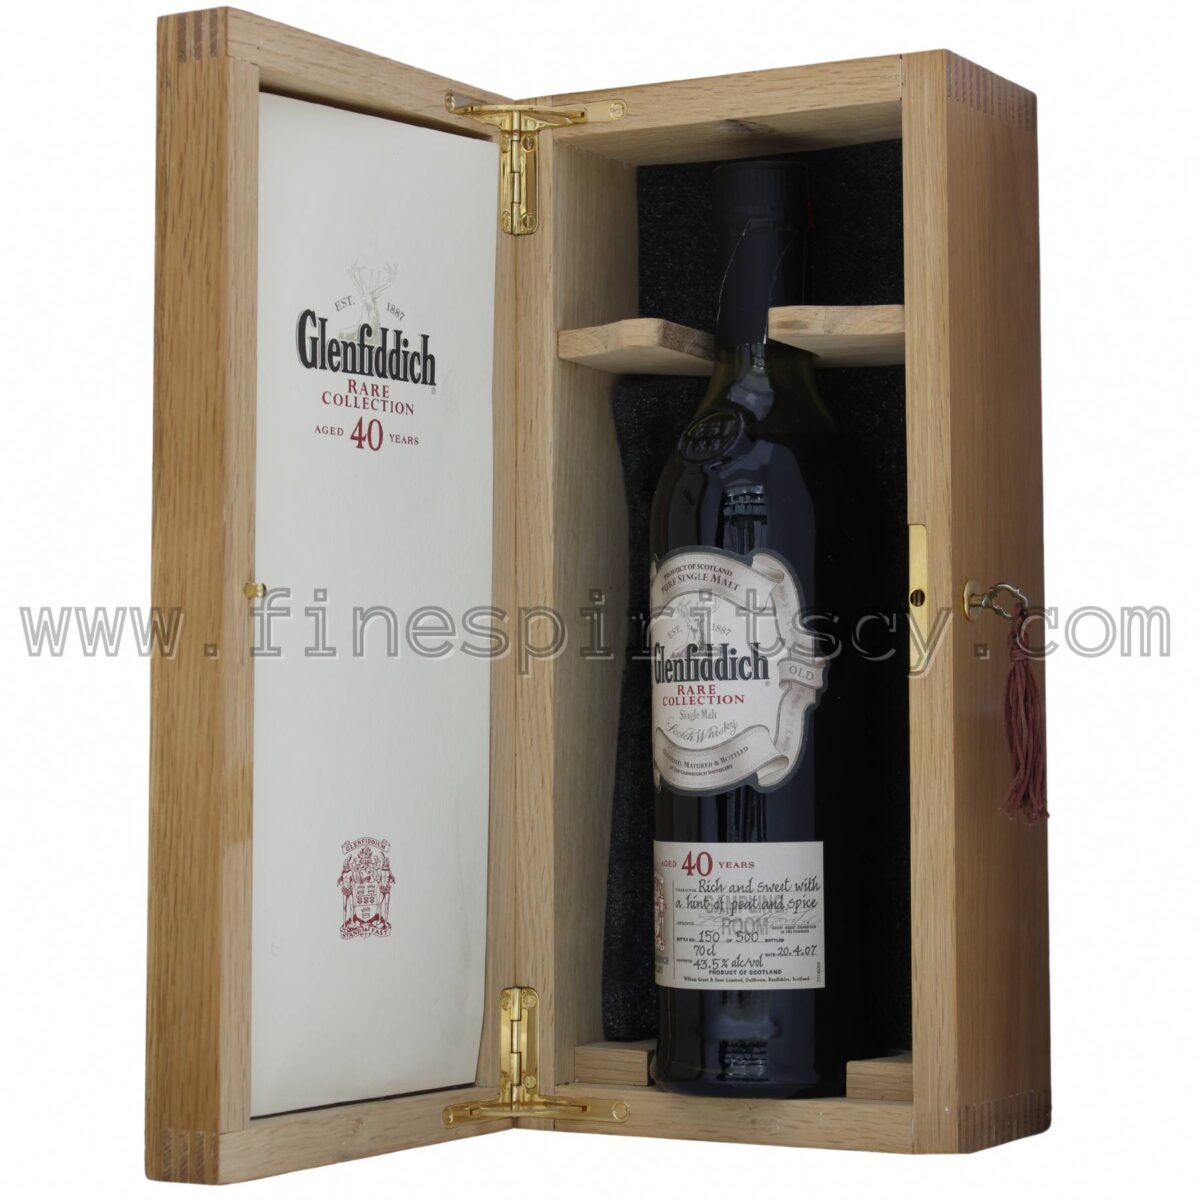 Glenfiddich 40 Years Old Rare Collection Limited Release Edition 2007 Bottled